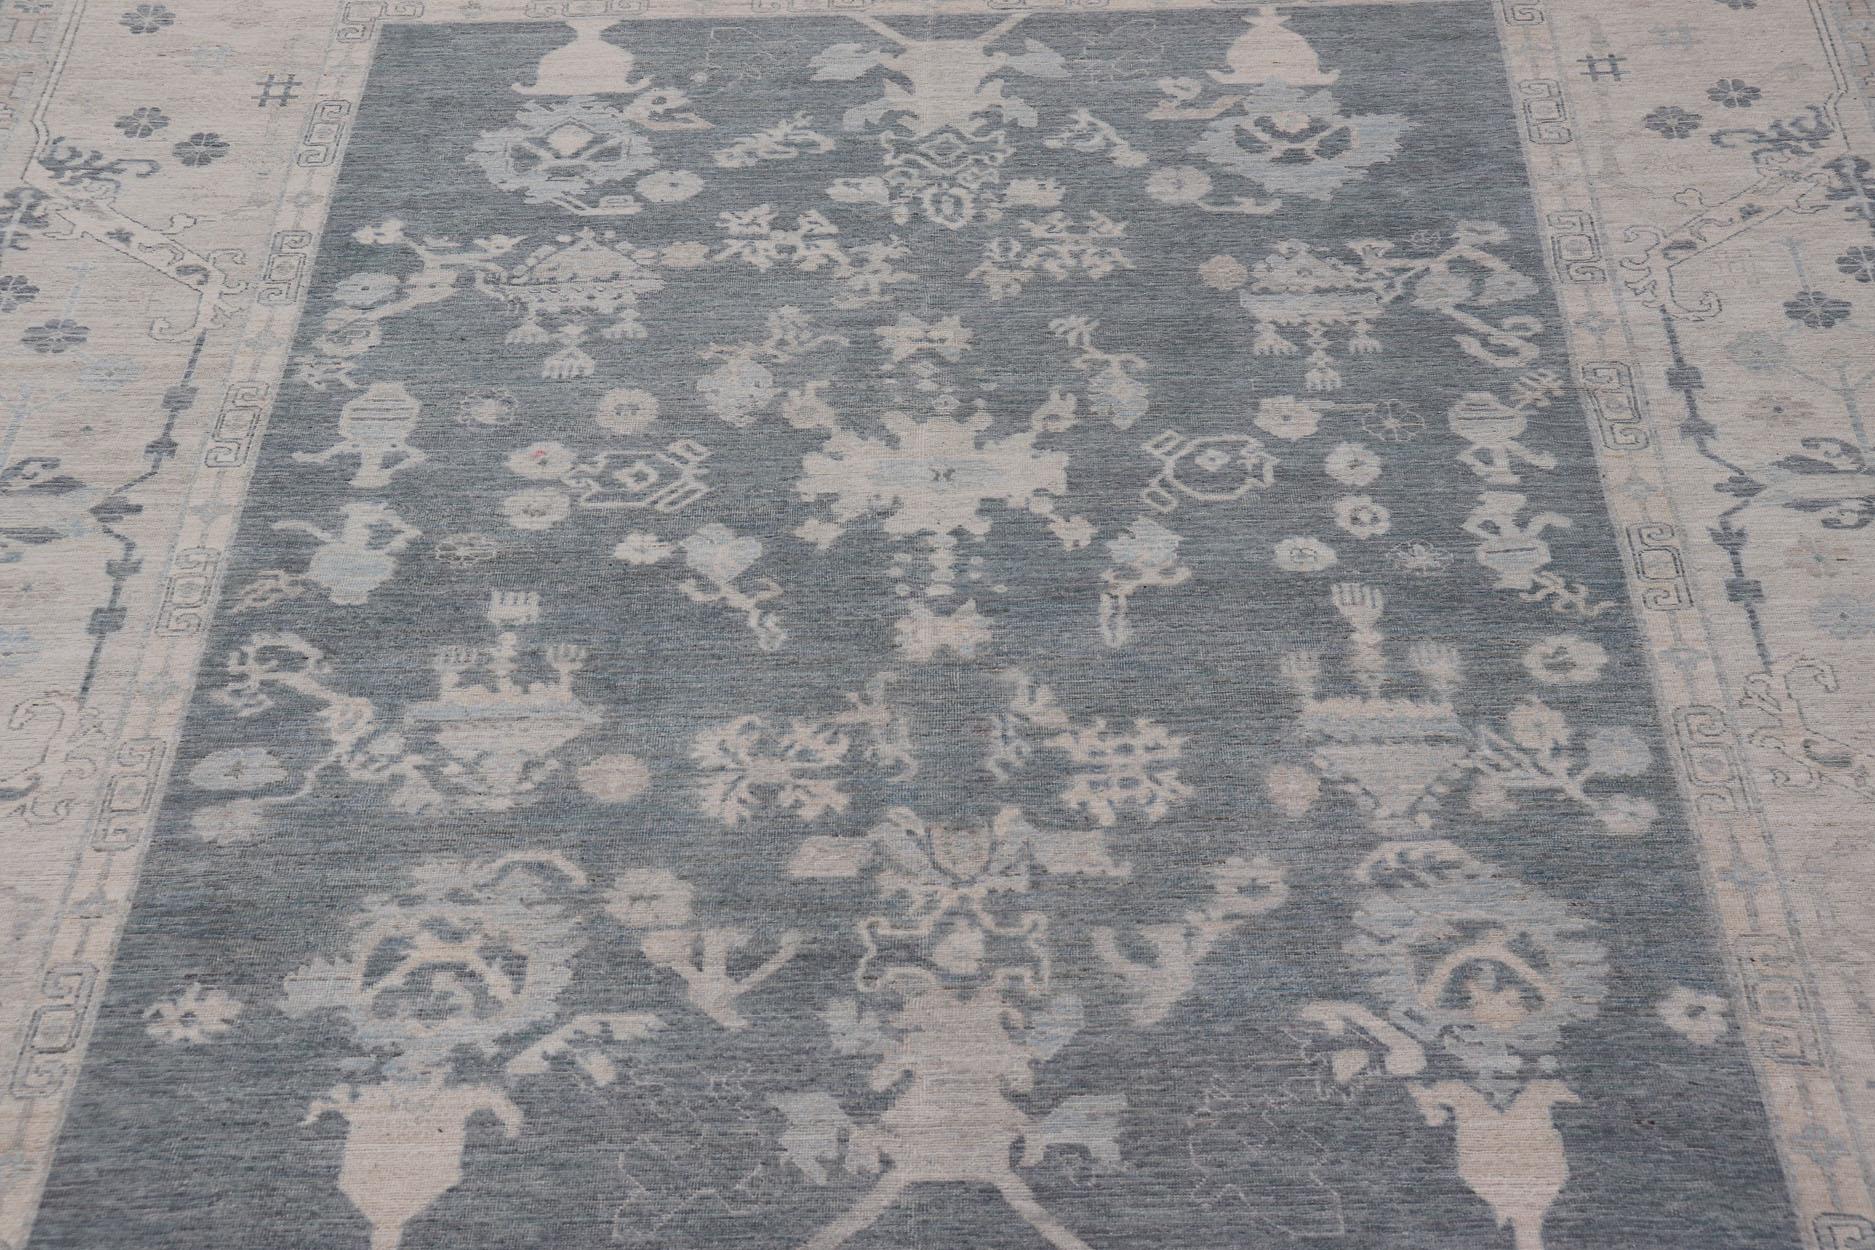 Large Modern sub-geometric oushak rug with muted tones of blue, gray, and cream. Keivan Woven Arts rug AWR-12866 country of origin: Afghanistan Type: Oushak Design: Geometric, mosaic medallion.
Measures: 11'10 x 14'8 
This hand knotted Oushak